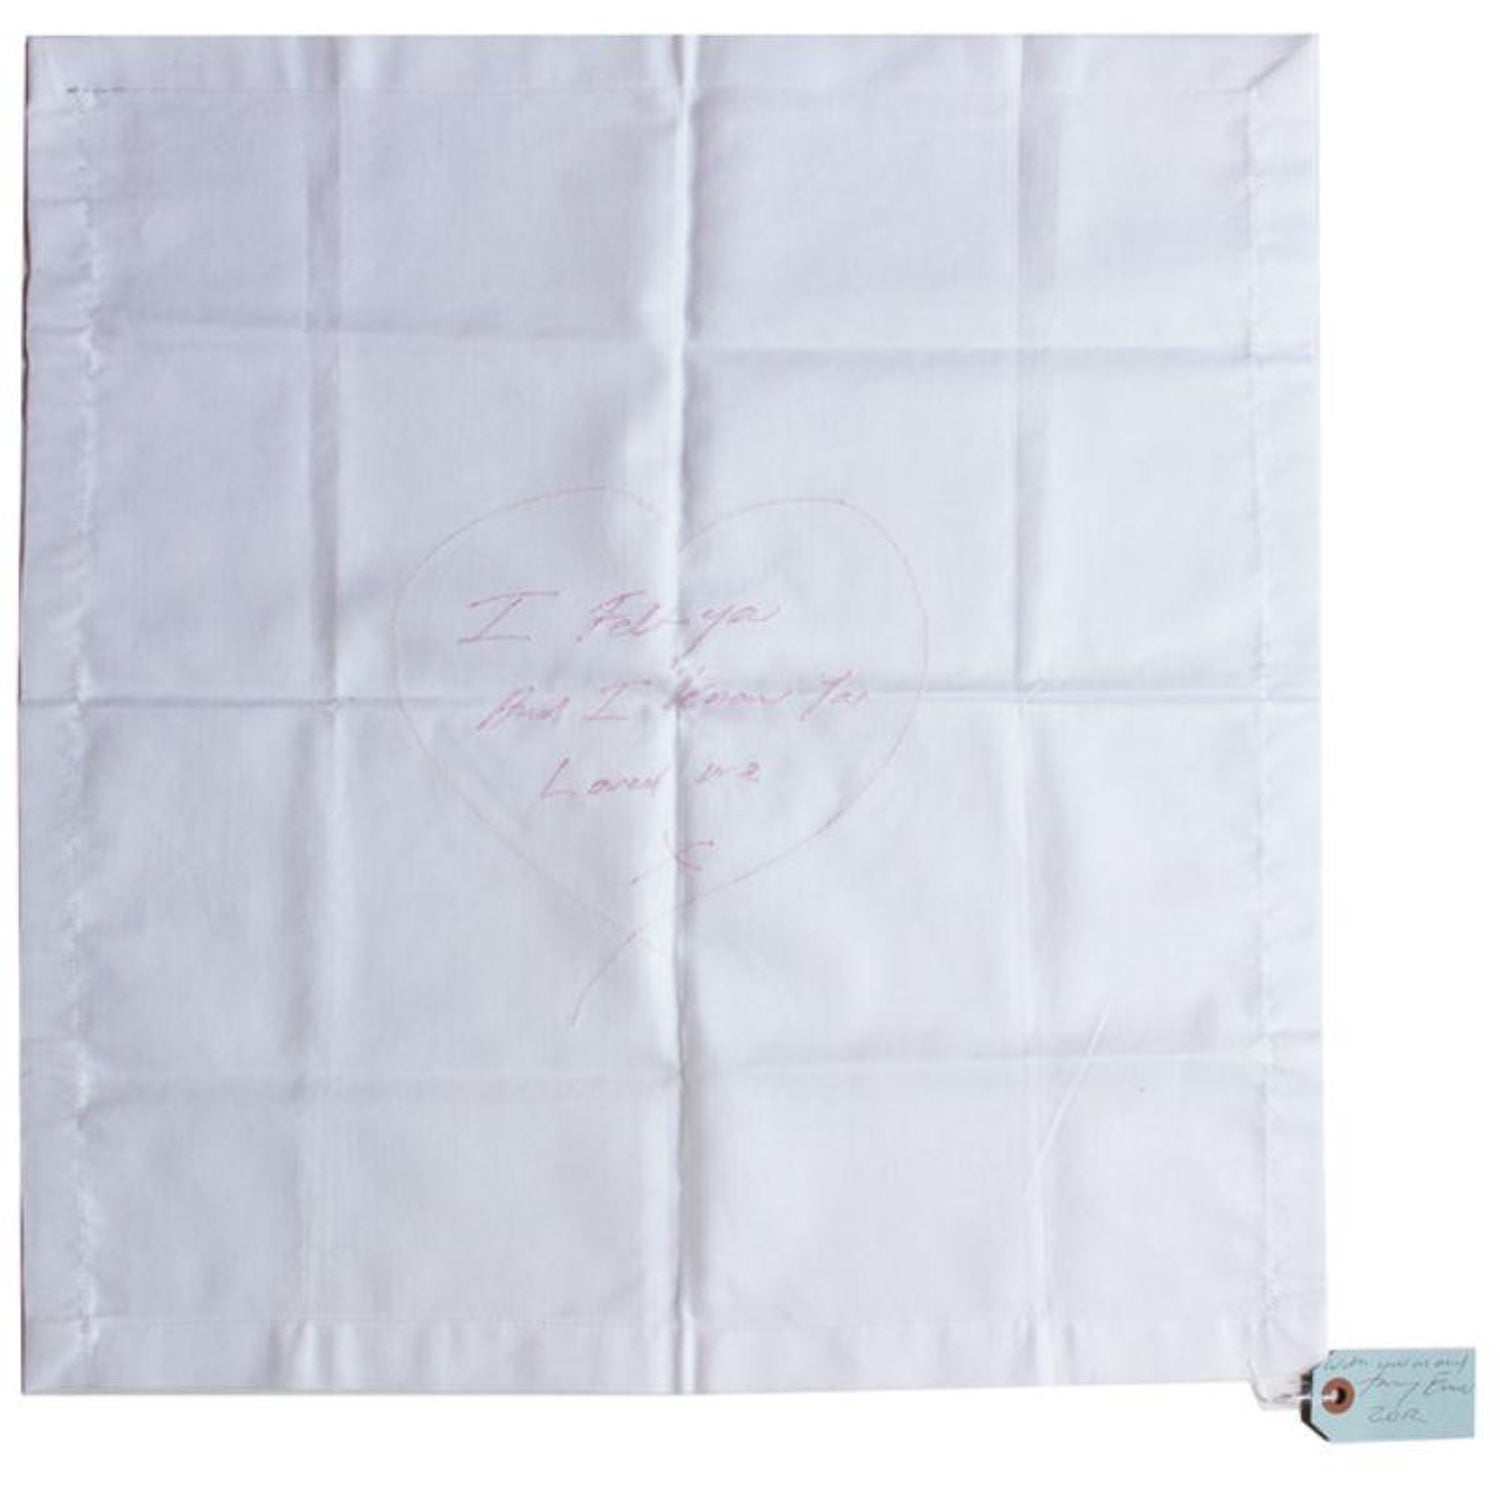 Tracey Emin - I Felt You And I know You Loved Me For Sale at 1stDibs